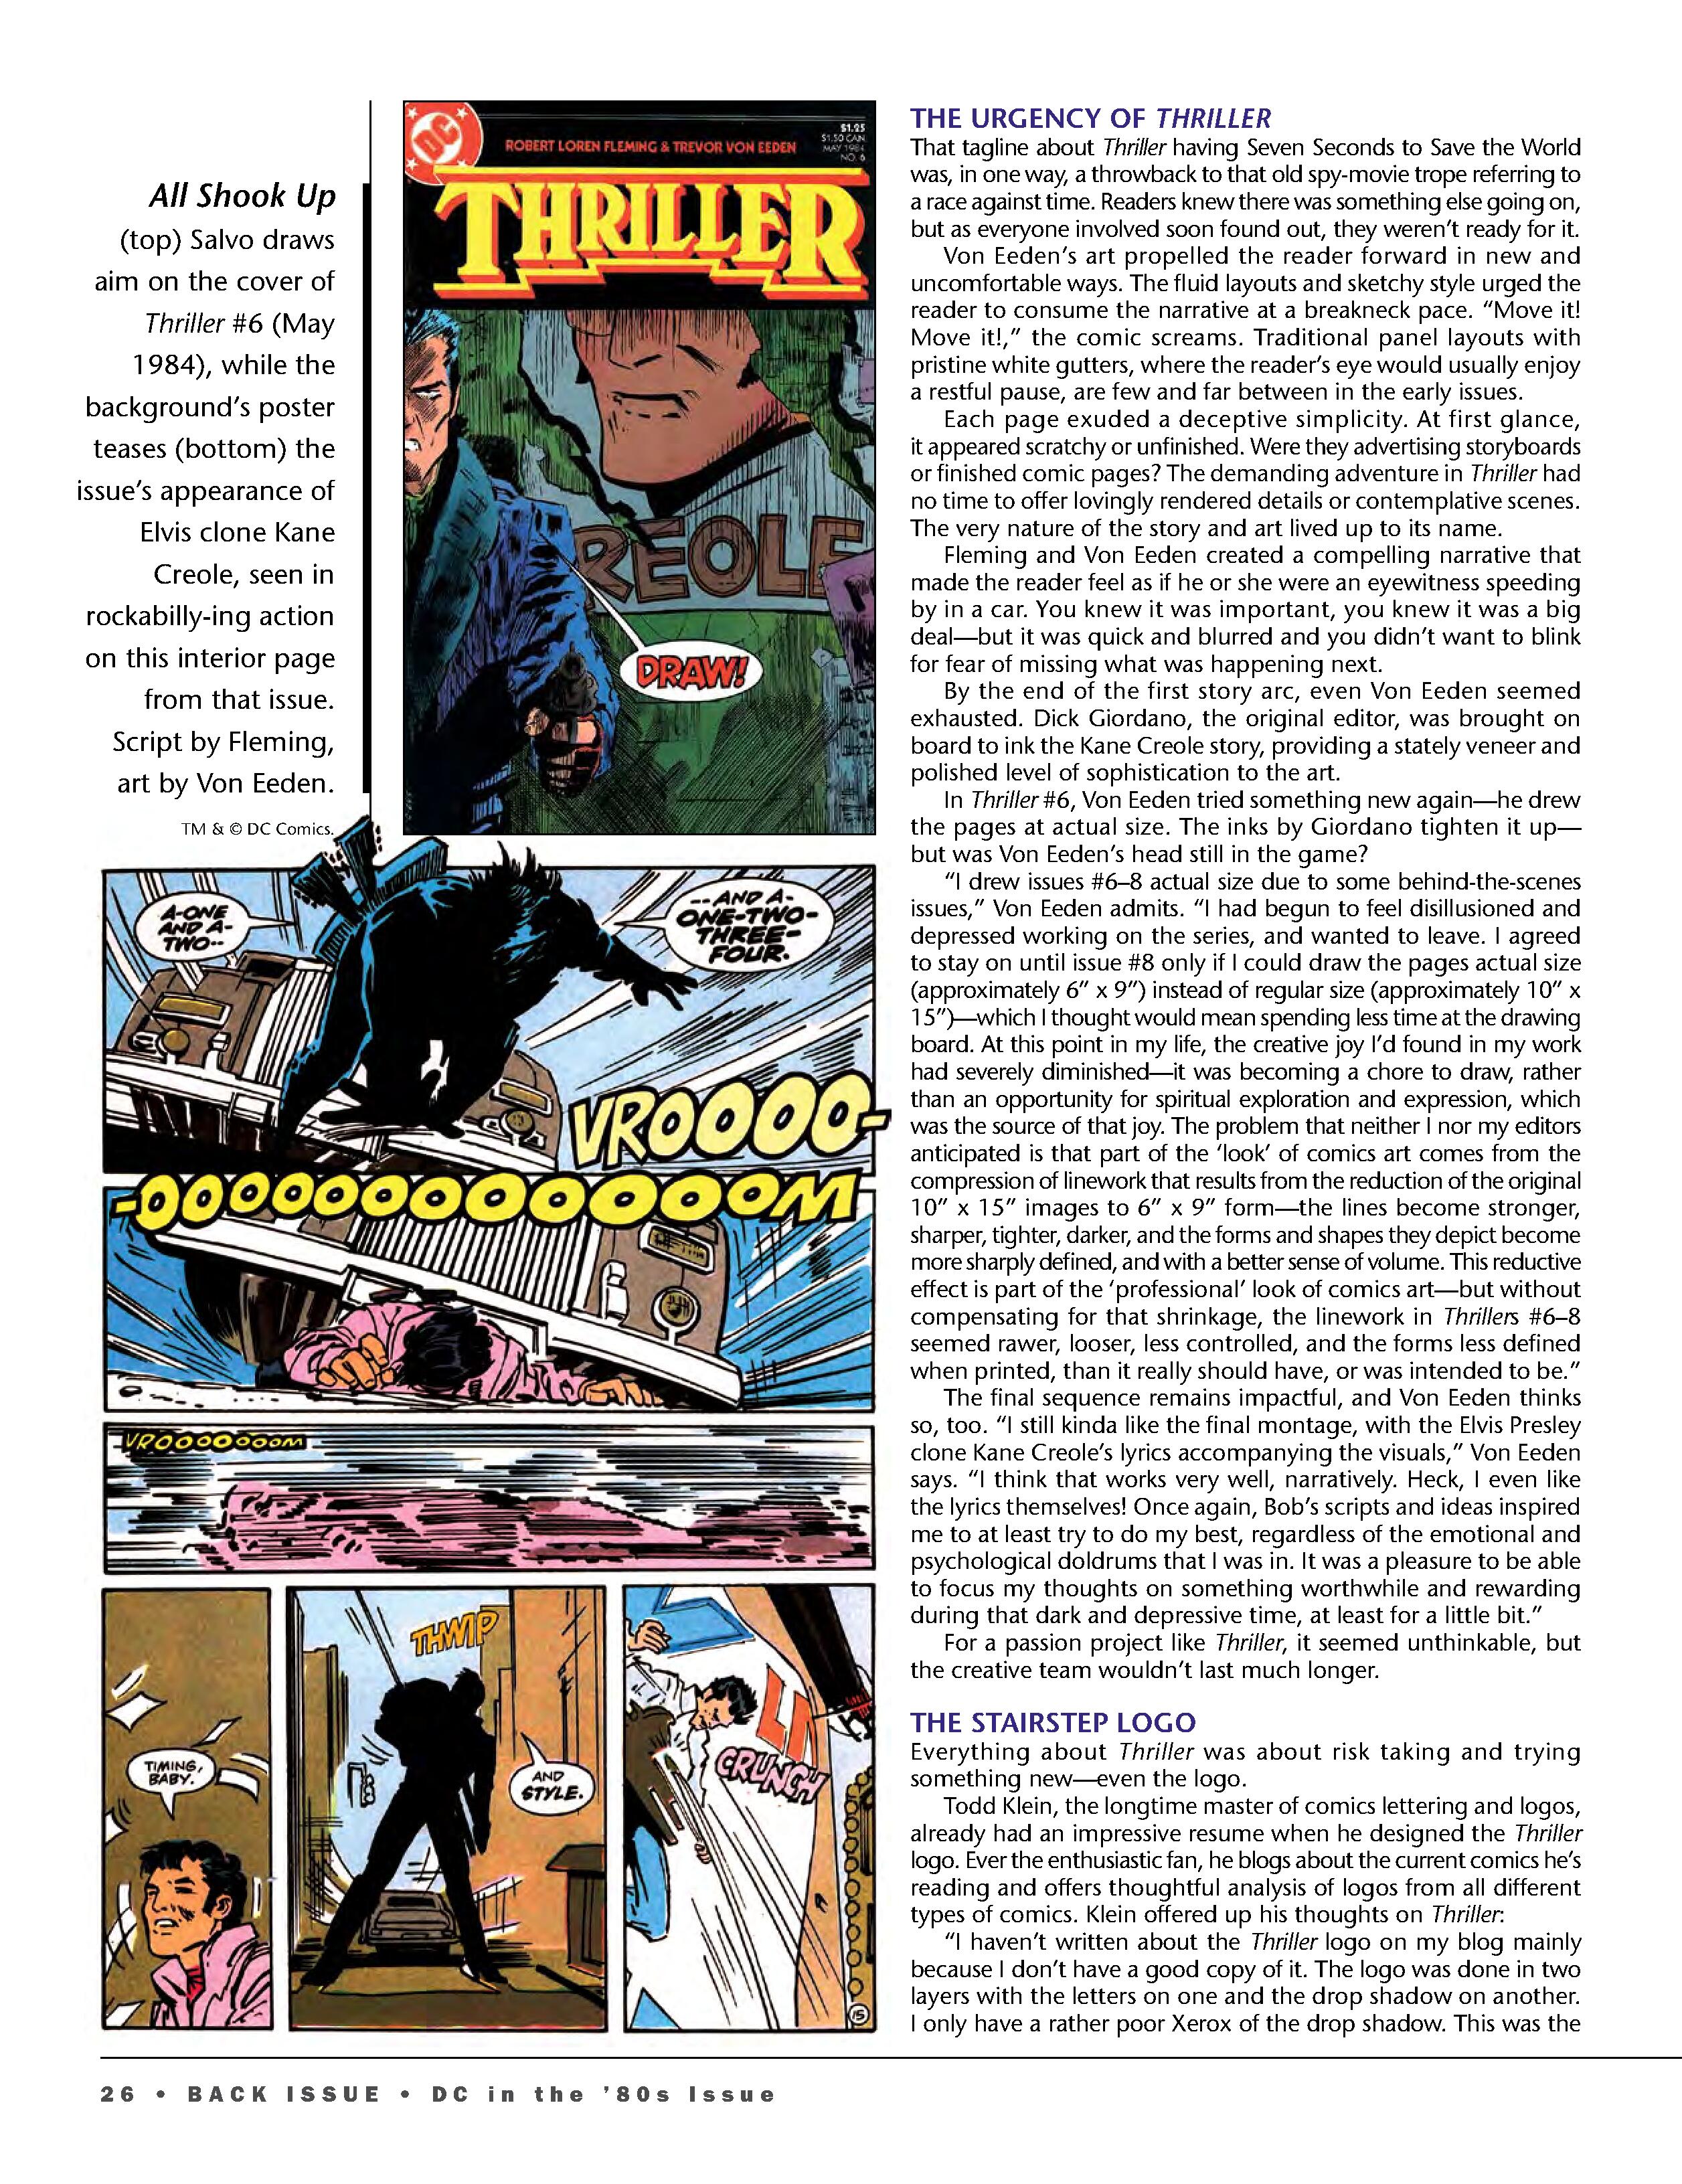 Read online Back Issue comic -  Issue #98 - 28